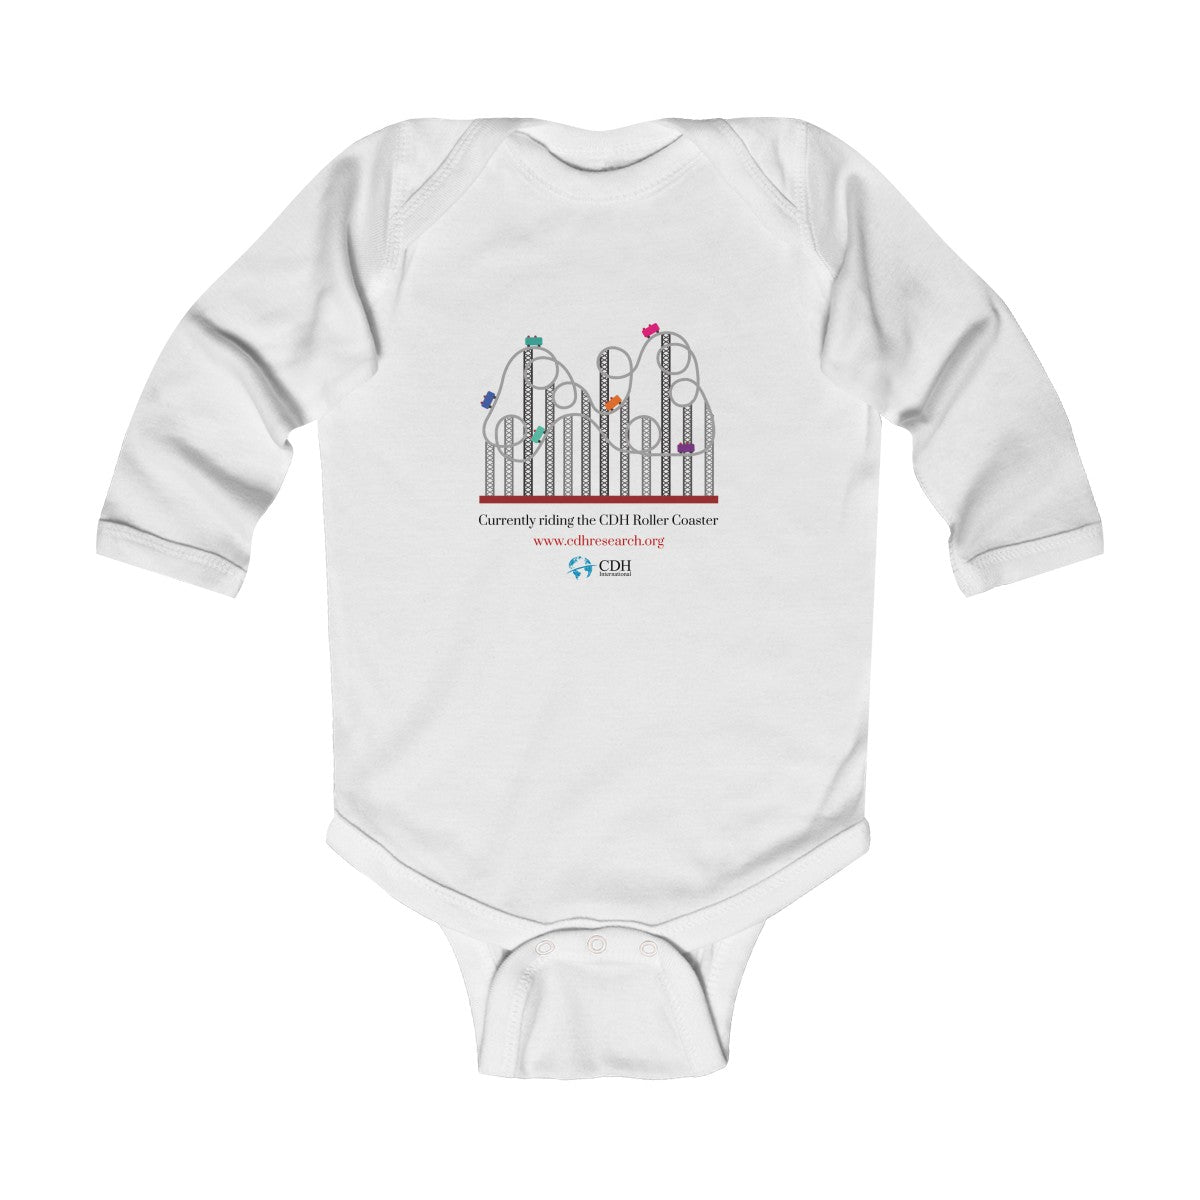 "Currently Riding the CDH Rollercoaster" Infant Long Sleeve Bodysuit - CDH International